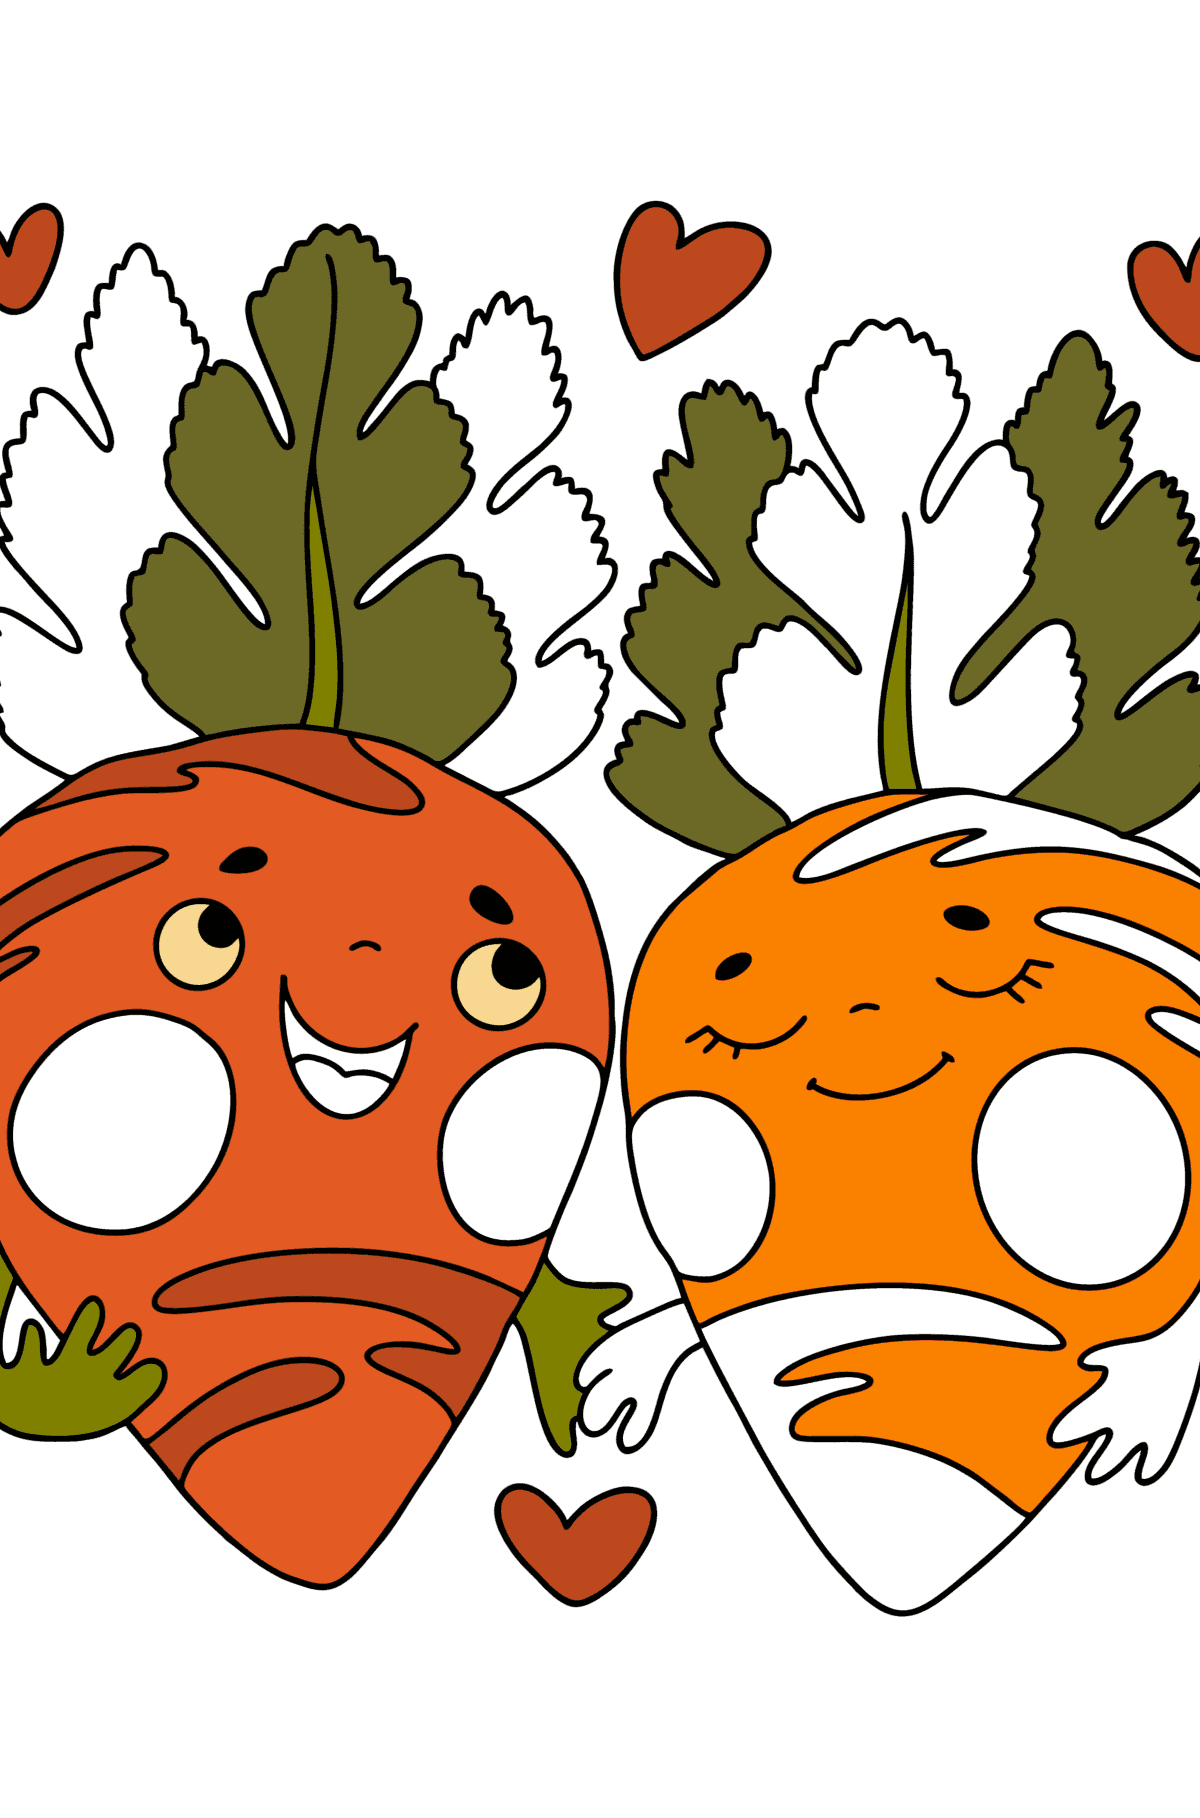 Carrots in love сolouring page - Coloring Pages for Kids